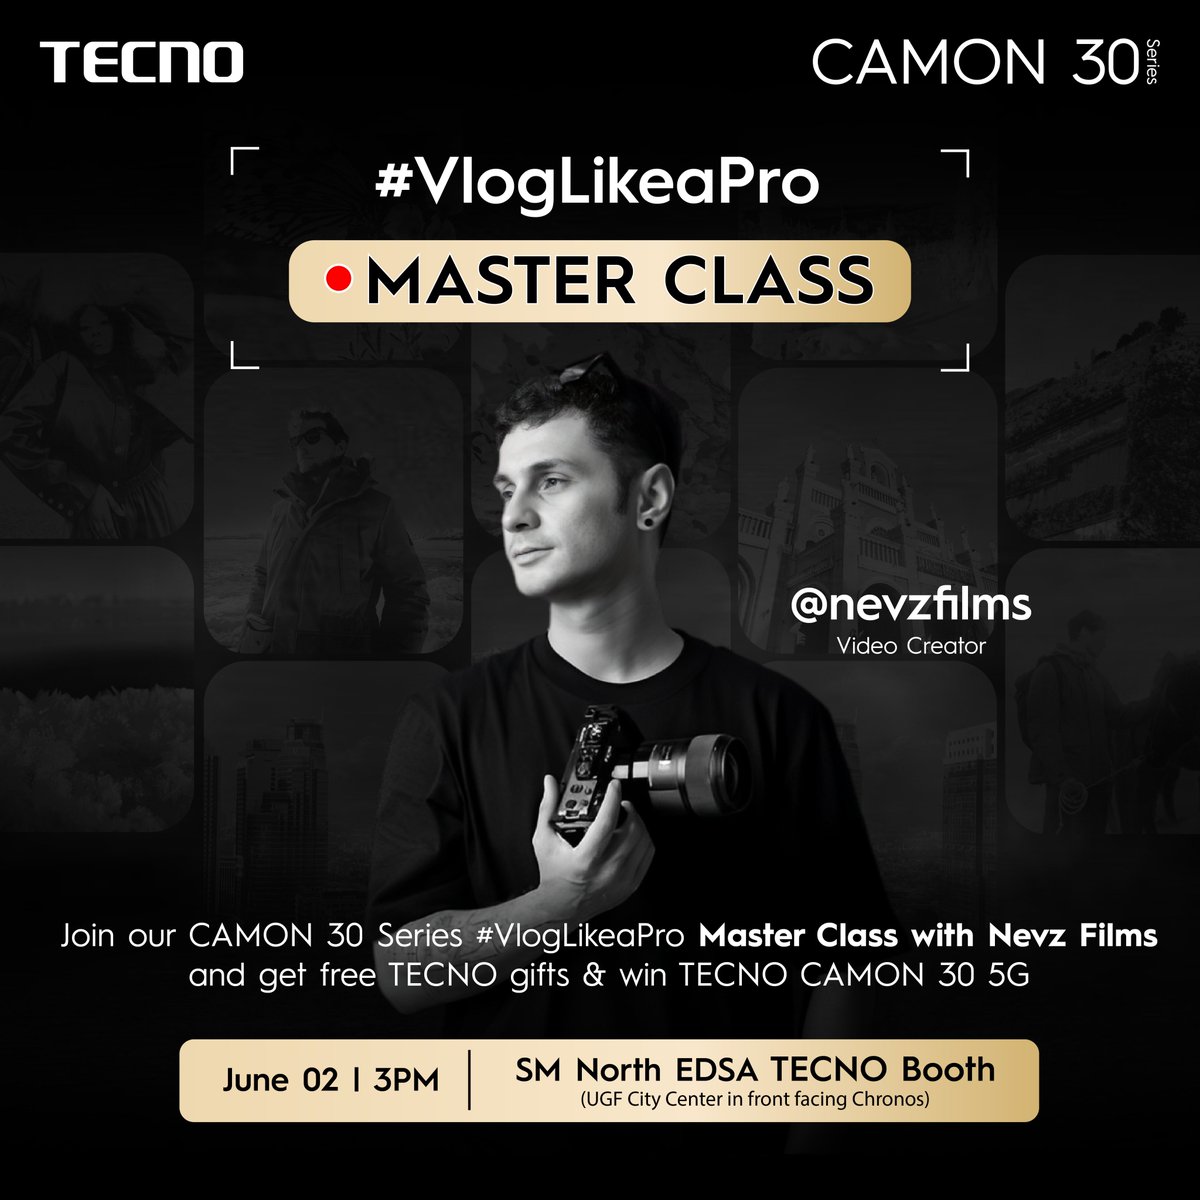 Learn how to #VlogLikeaPro with Nevz using the TECNO CAMON 30 Series. Join us at SM North Edsa on June 02 at 3 pm and get a chance to receive TECNO Gifts and win TECNO CAMON 30 5G!

Pre-register Now: forms.gle/bFGtUXSgJiZb3m…

#VlogLikeaPro #TECNOCAMON30Series #TECNOPhilippines